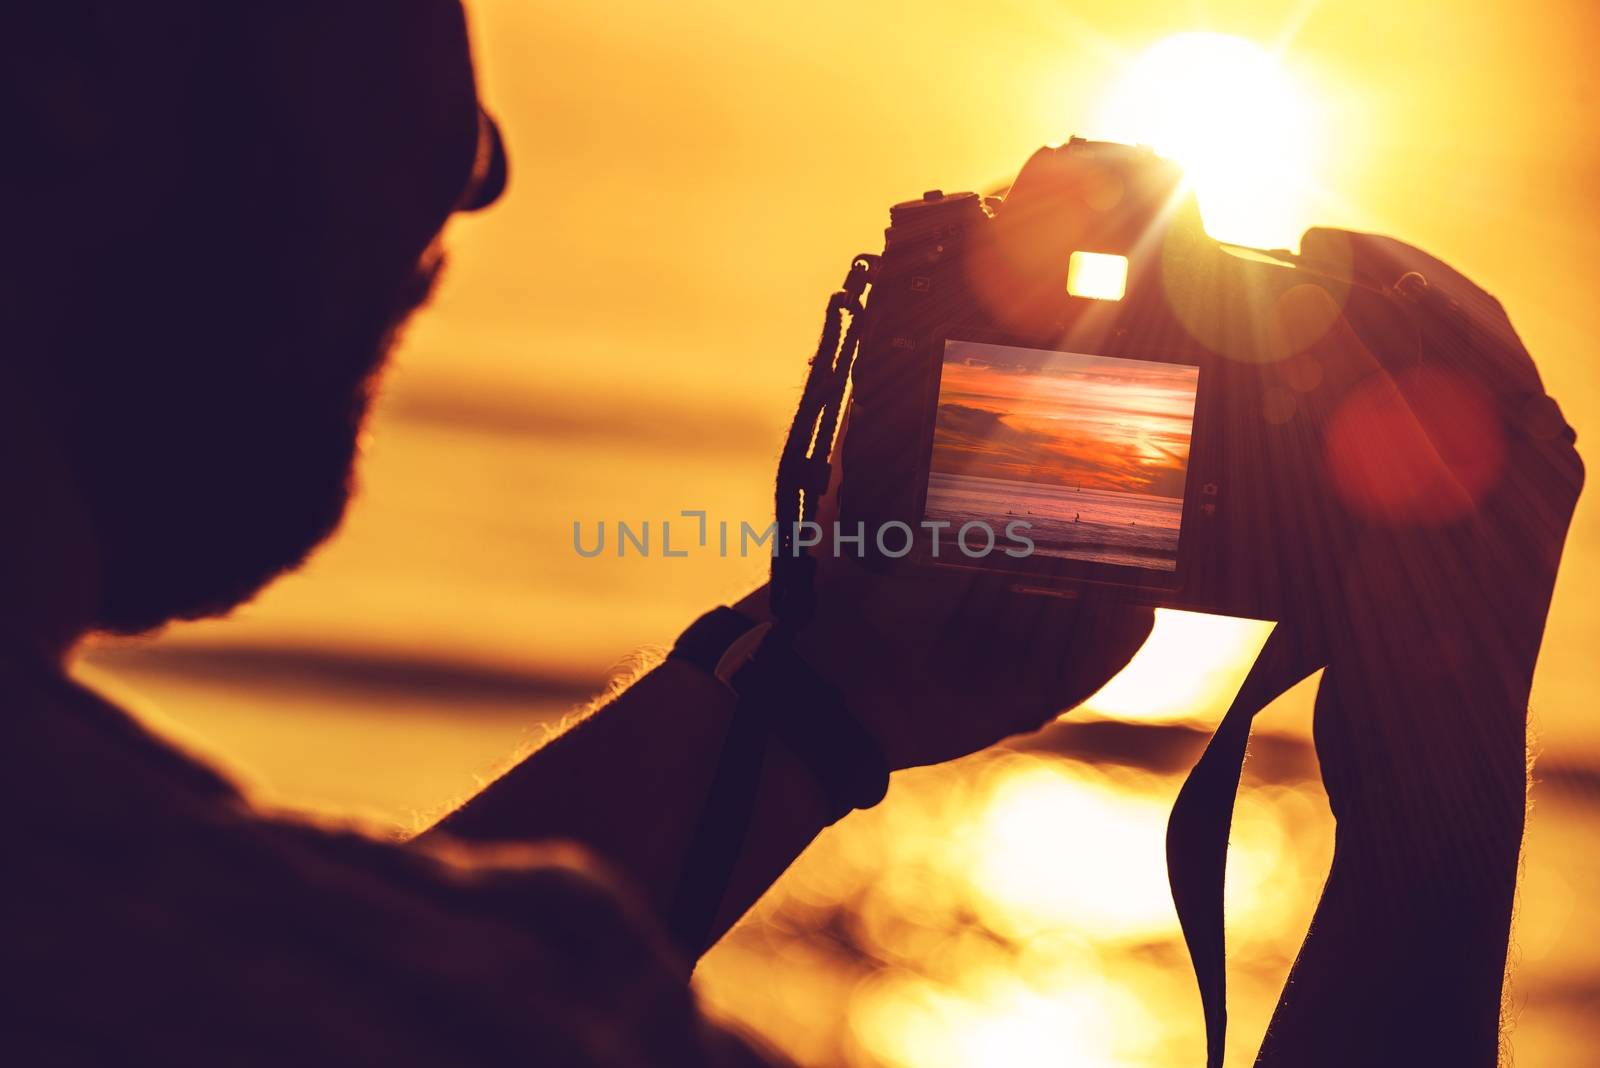 Travel Digital Photography Concept Photo with Men Playing His Professional Digital SLR Camera During Sunset.